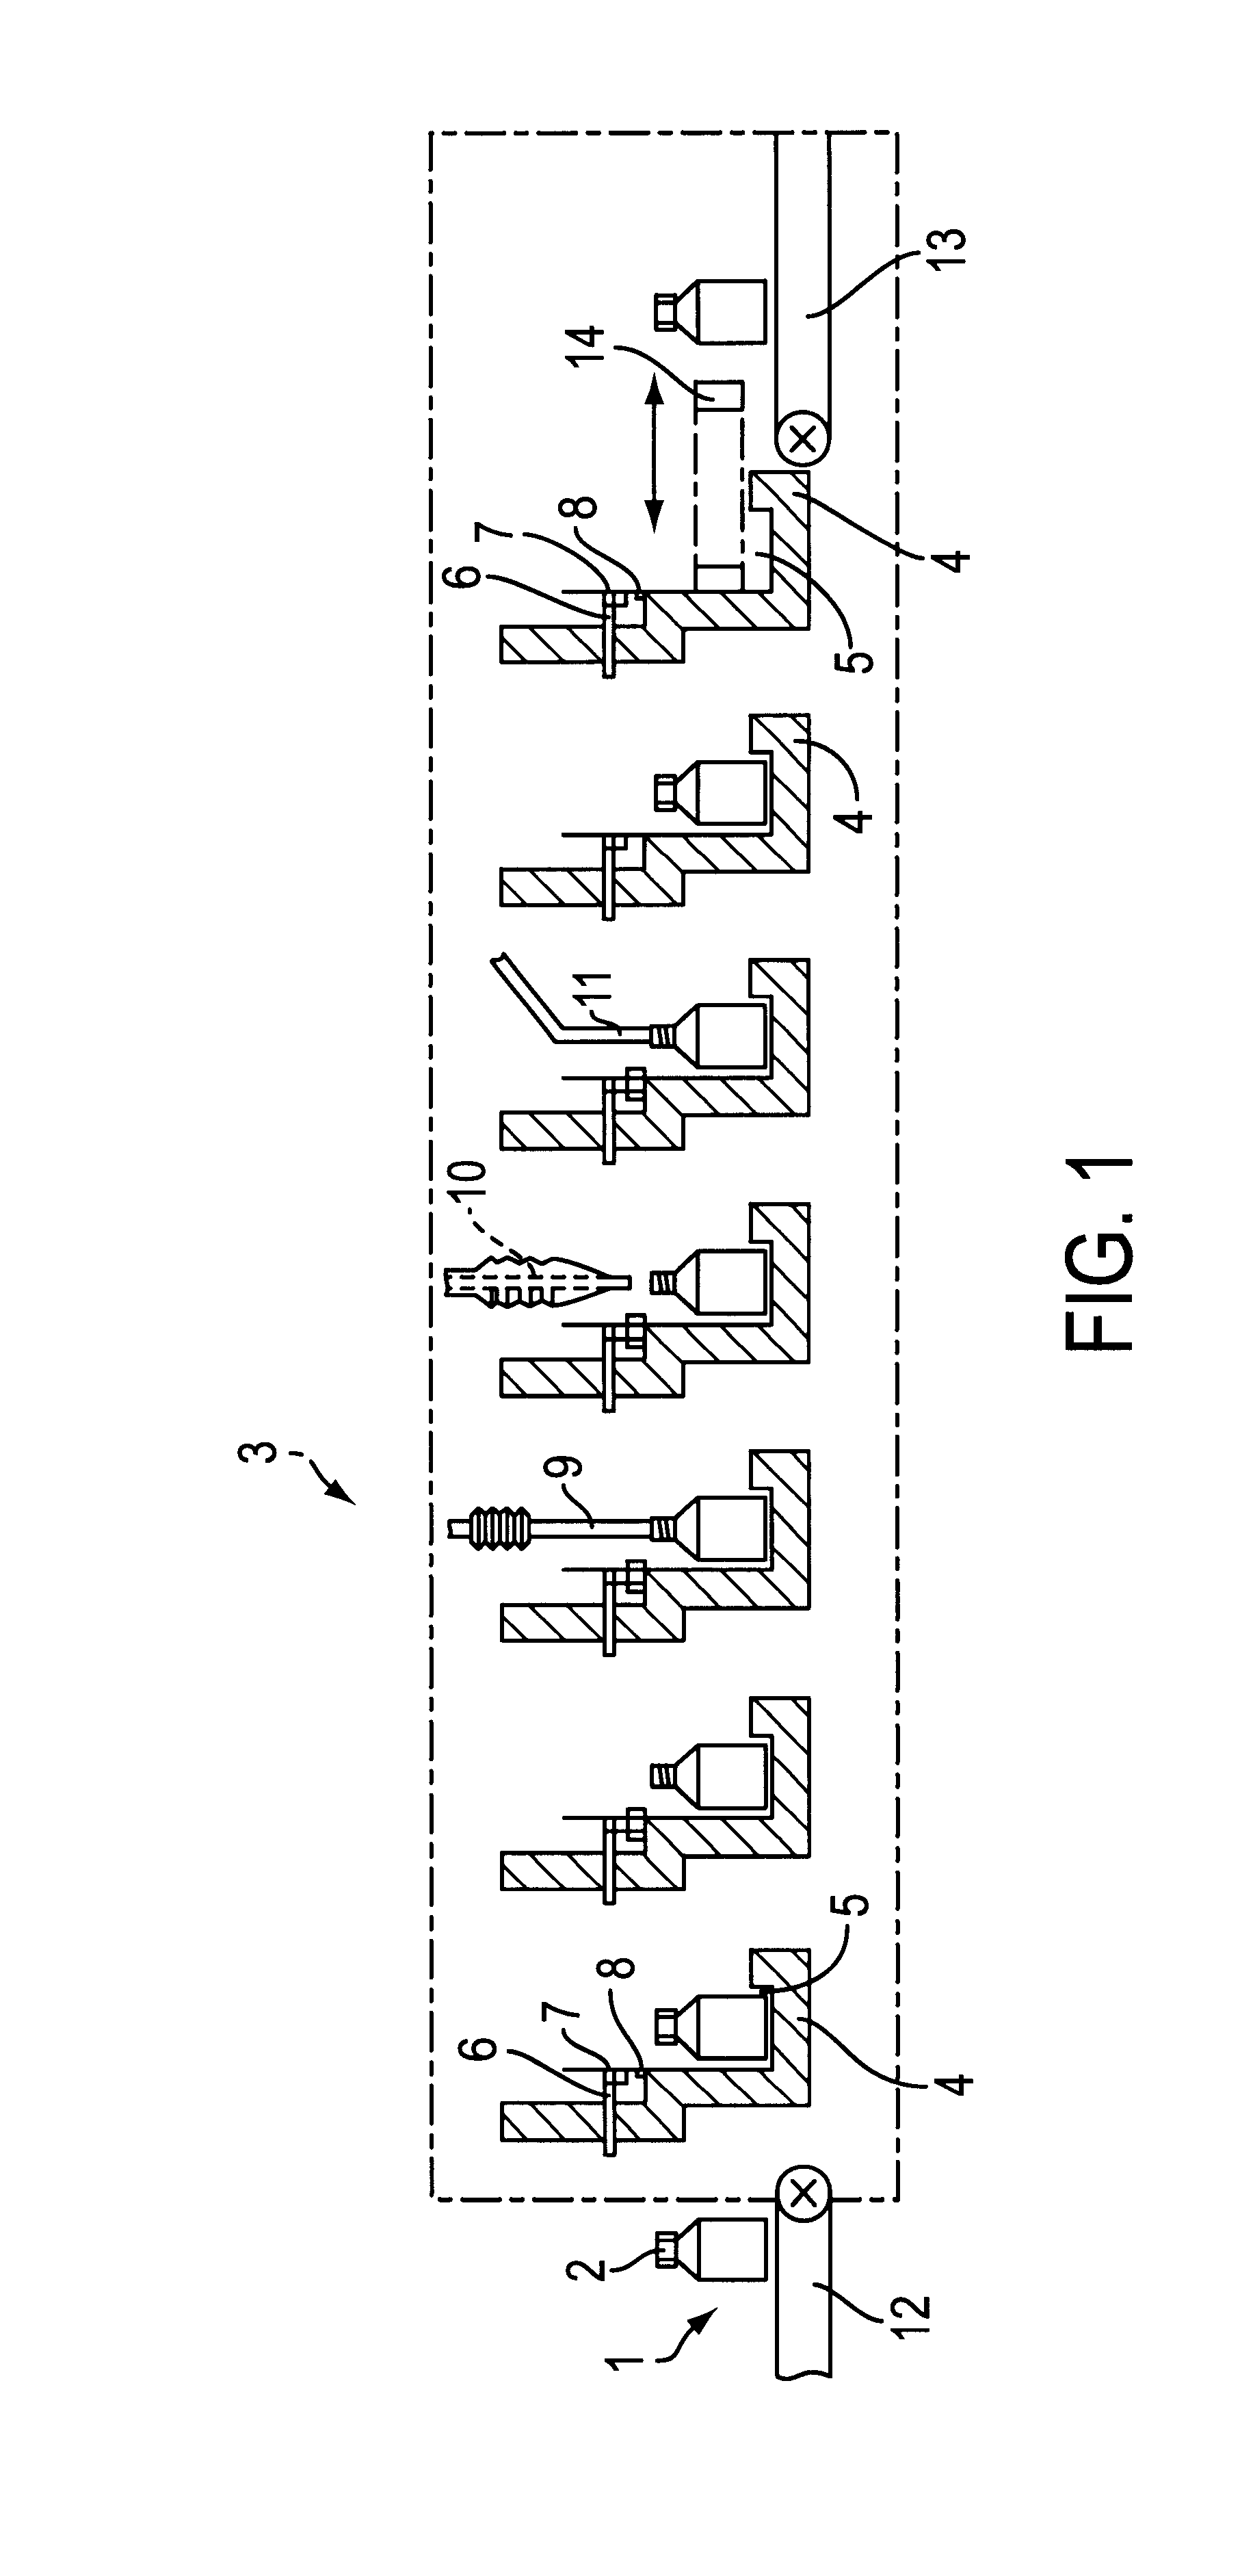 Method of handling, filling and sealing packaging containers